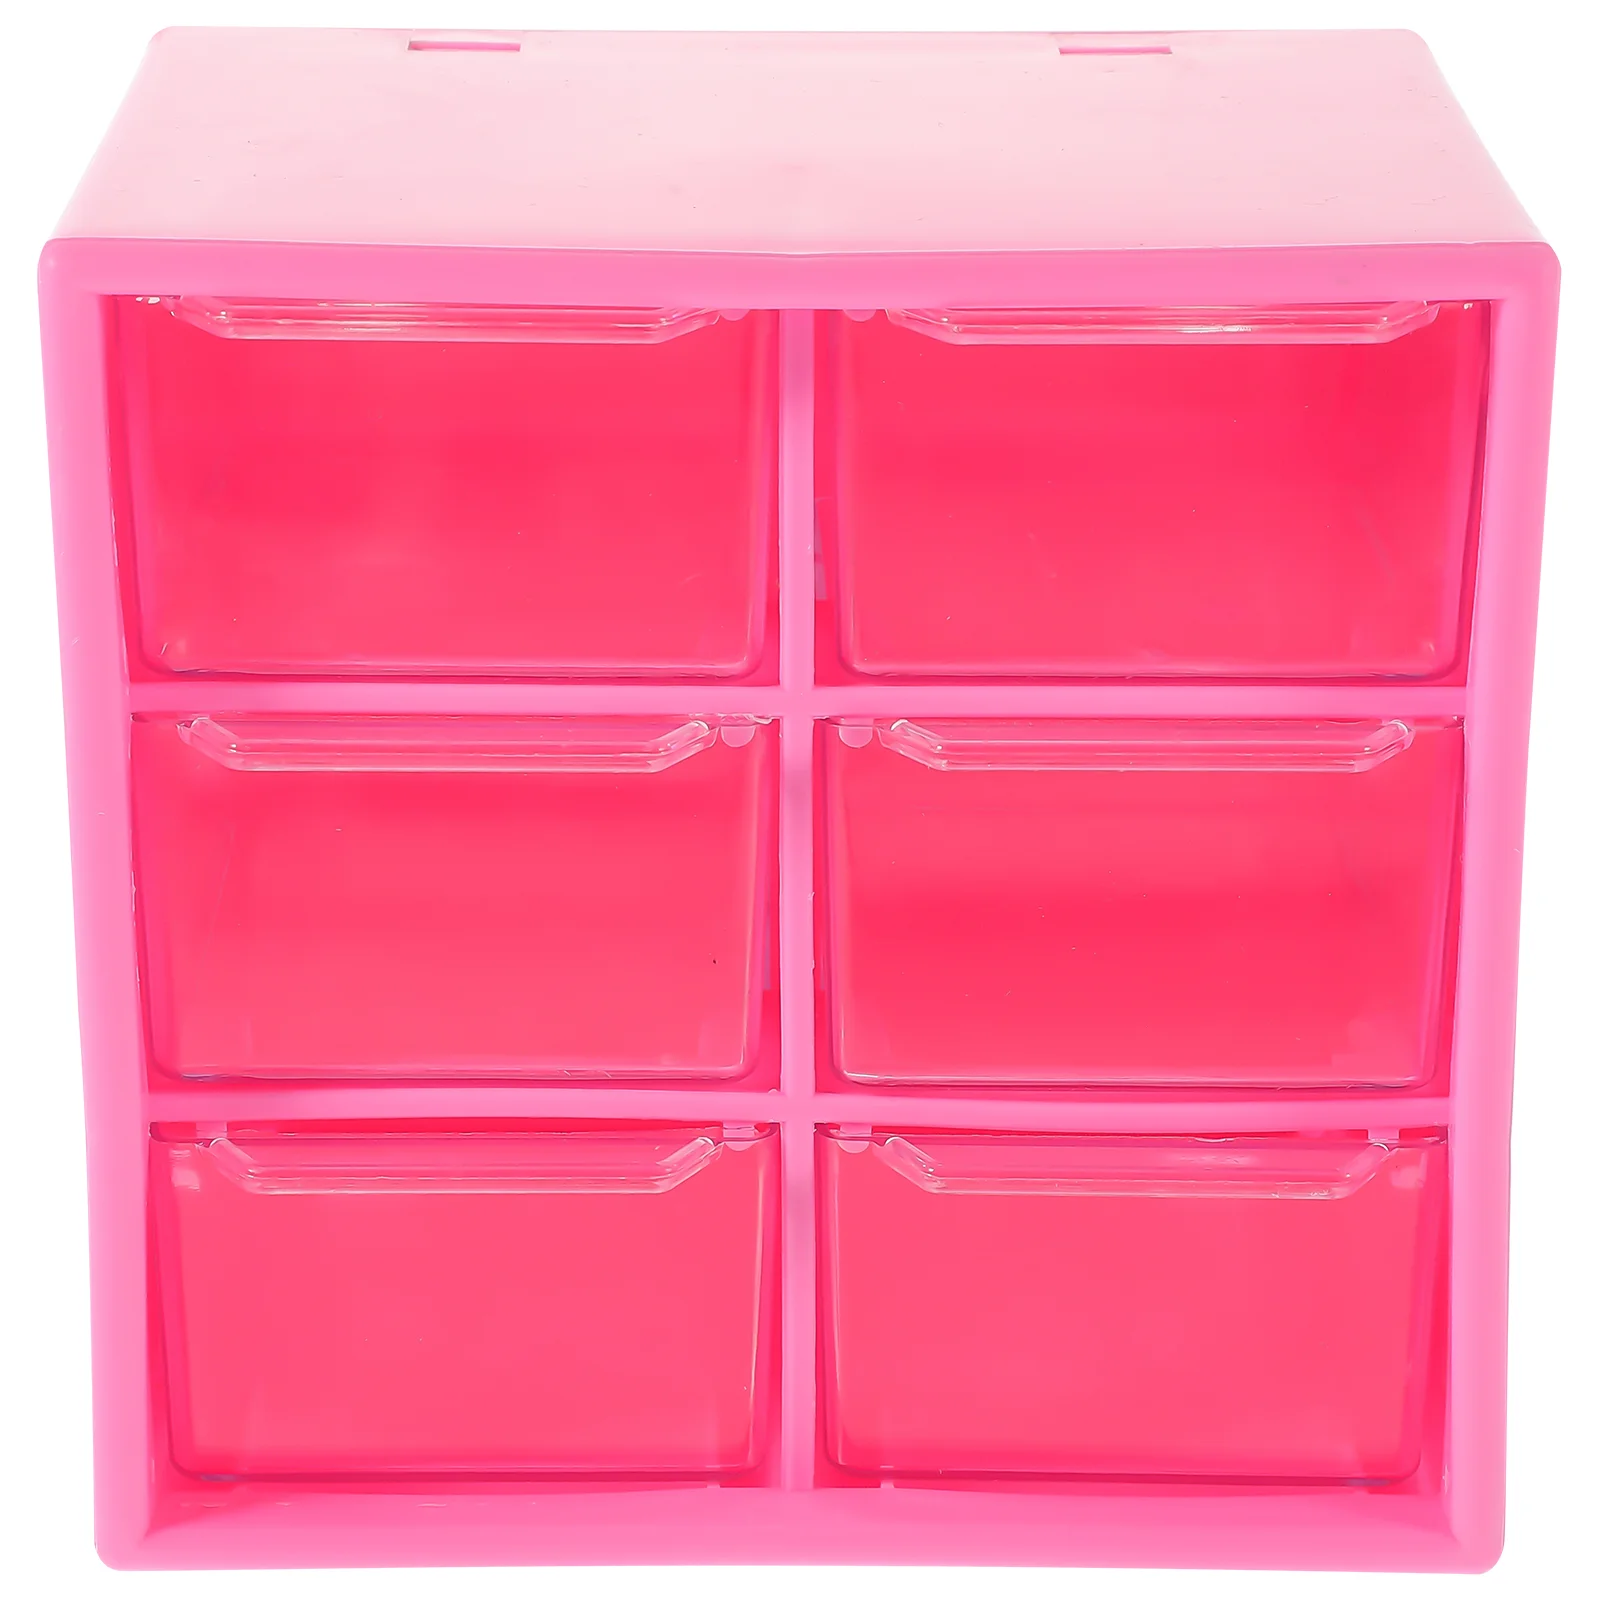 Drawer Storage Box Practical Organizer Holder Office Table Makeup Stand Case Plastic Drawers Desk Student